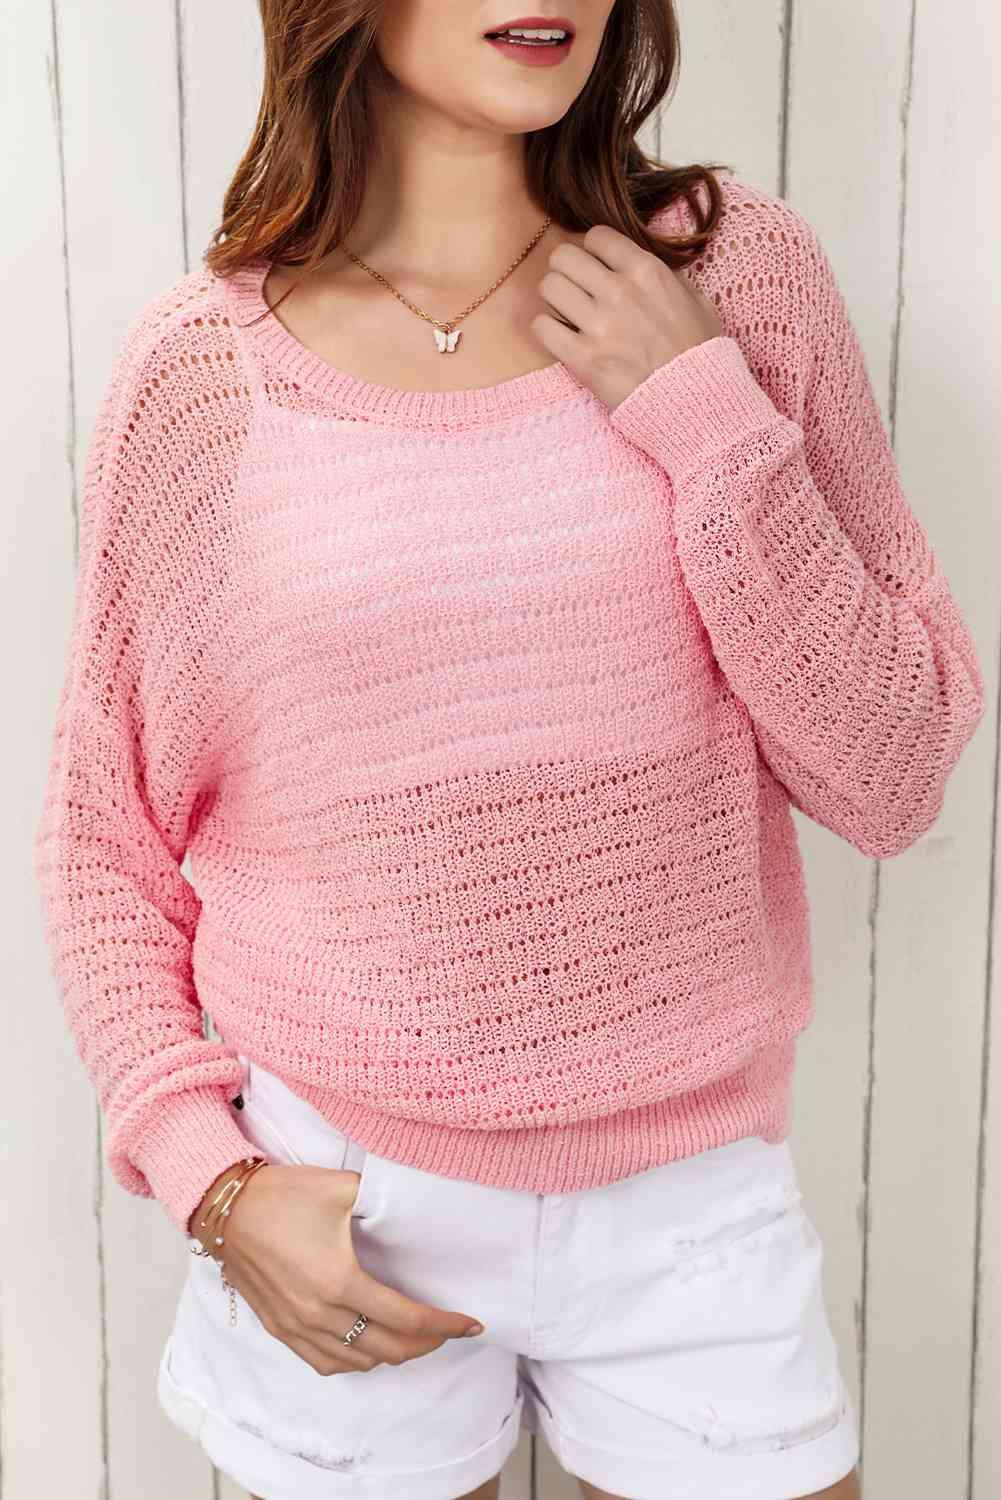 Double Take Openwork Round Neck Dropped Shoulder Knit Top - Lab Fashion, Home & Health